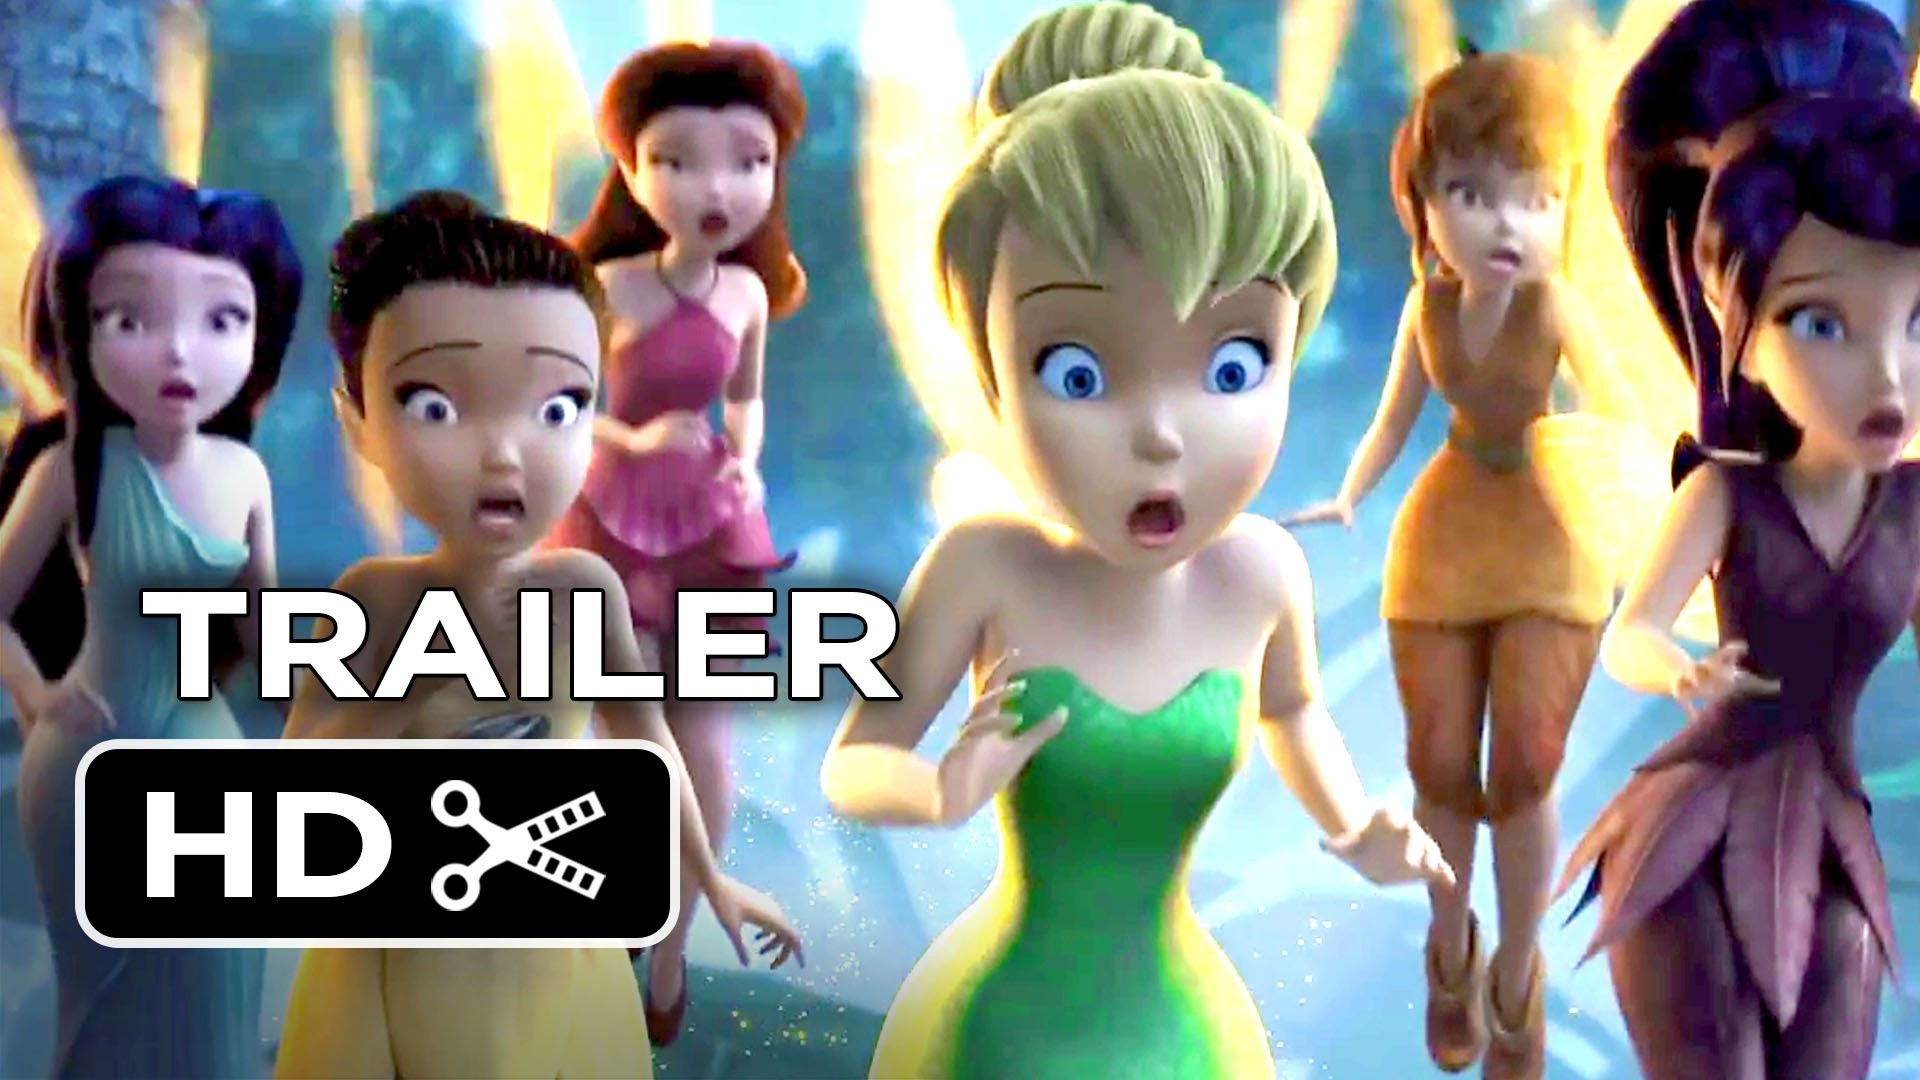 1920x1080 Tinkerbell And The Pirate Fairy Official UK Trailer #1 (2014) - Tom  Hiddleston Movie HD - YouTube